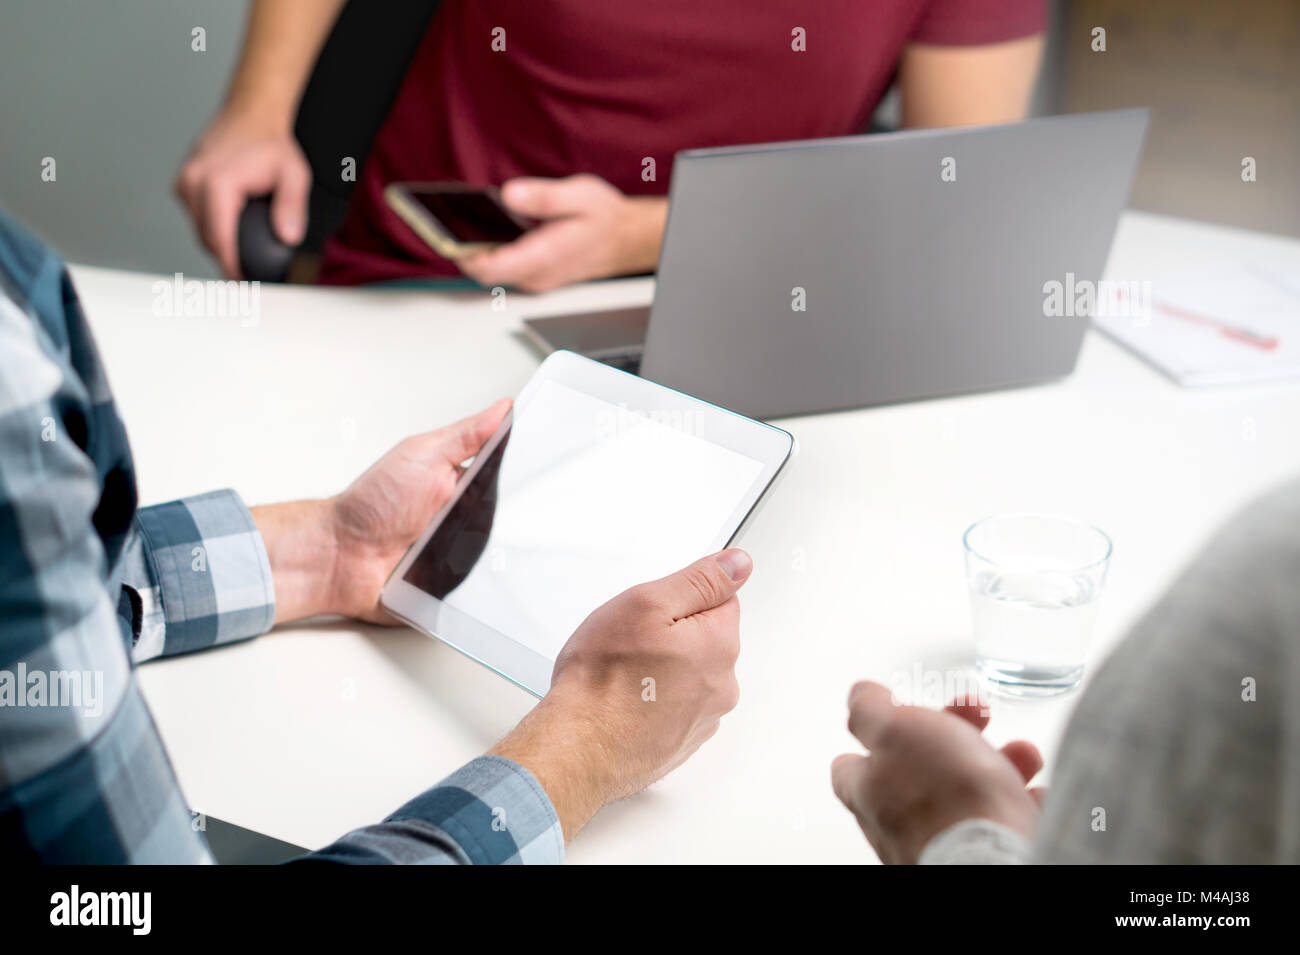 Small business, start up or marketing team working together and having meeting. Workstation with modern technology. Happy casual business people. Stock Photo